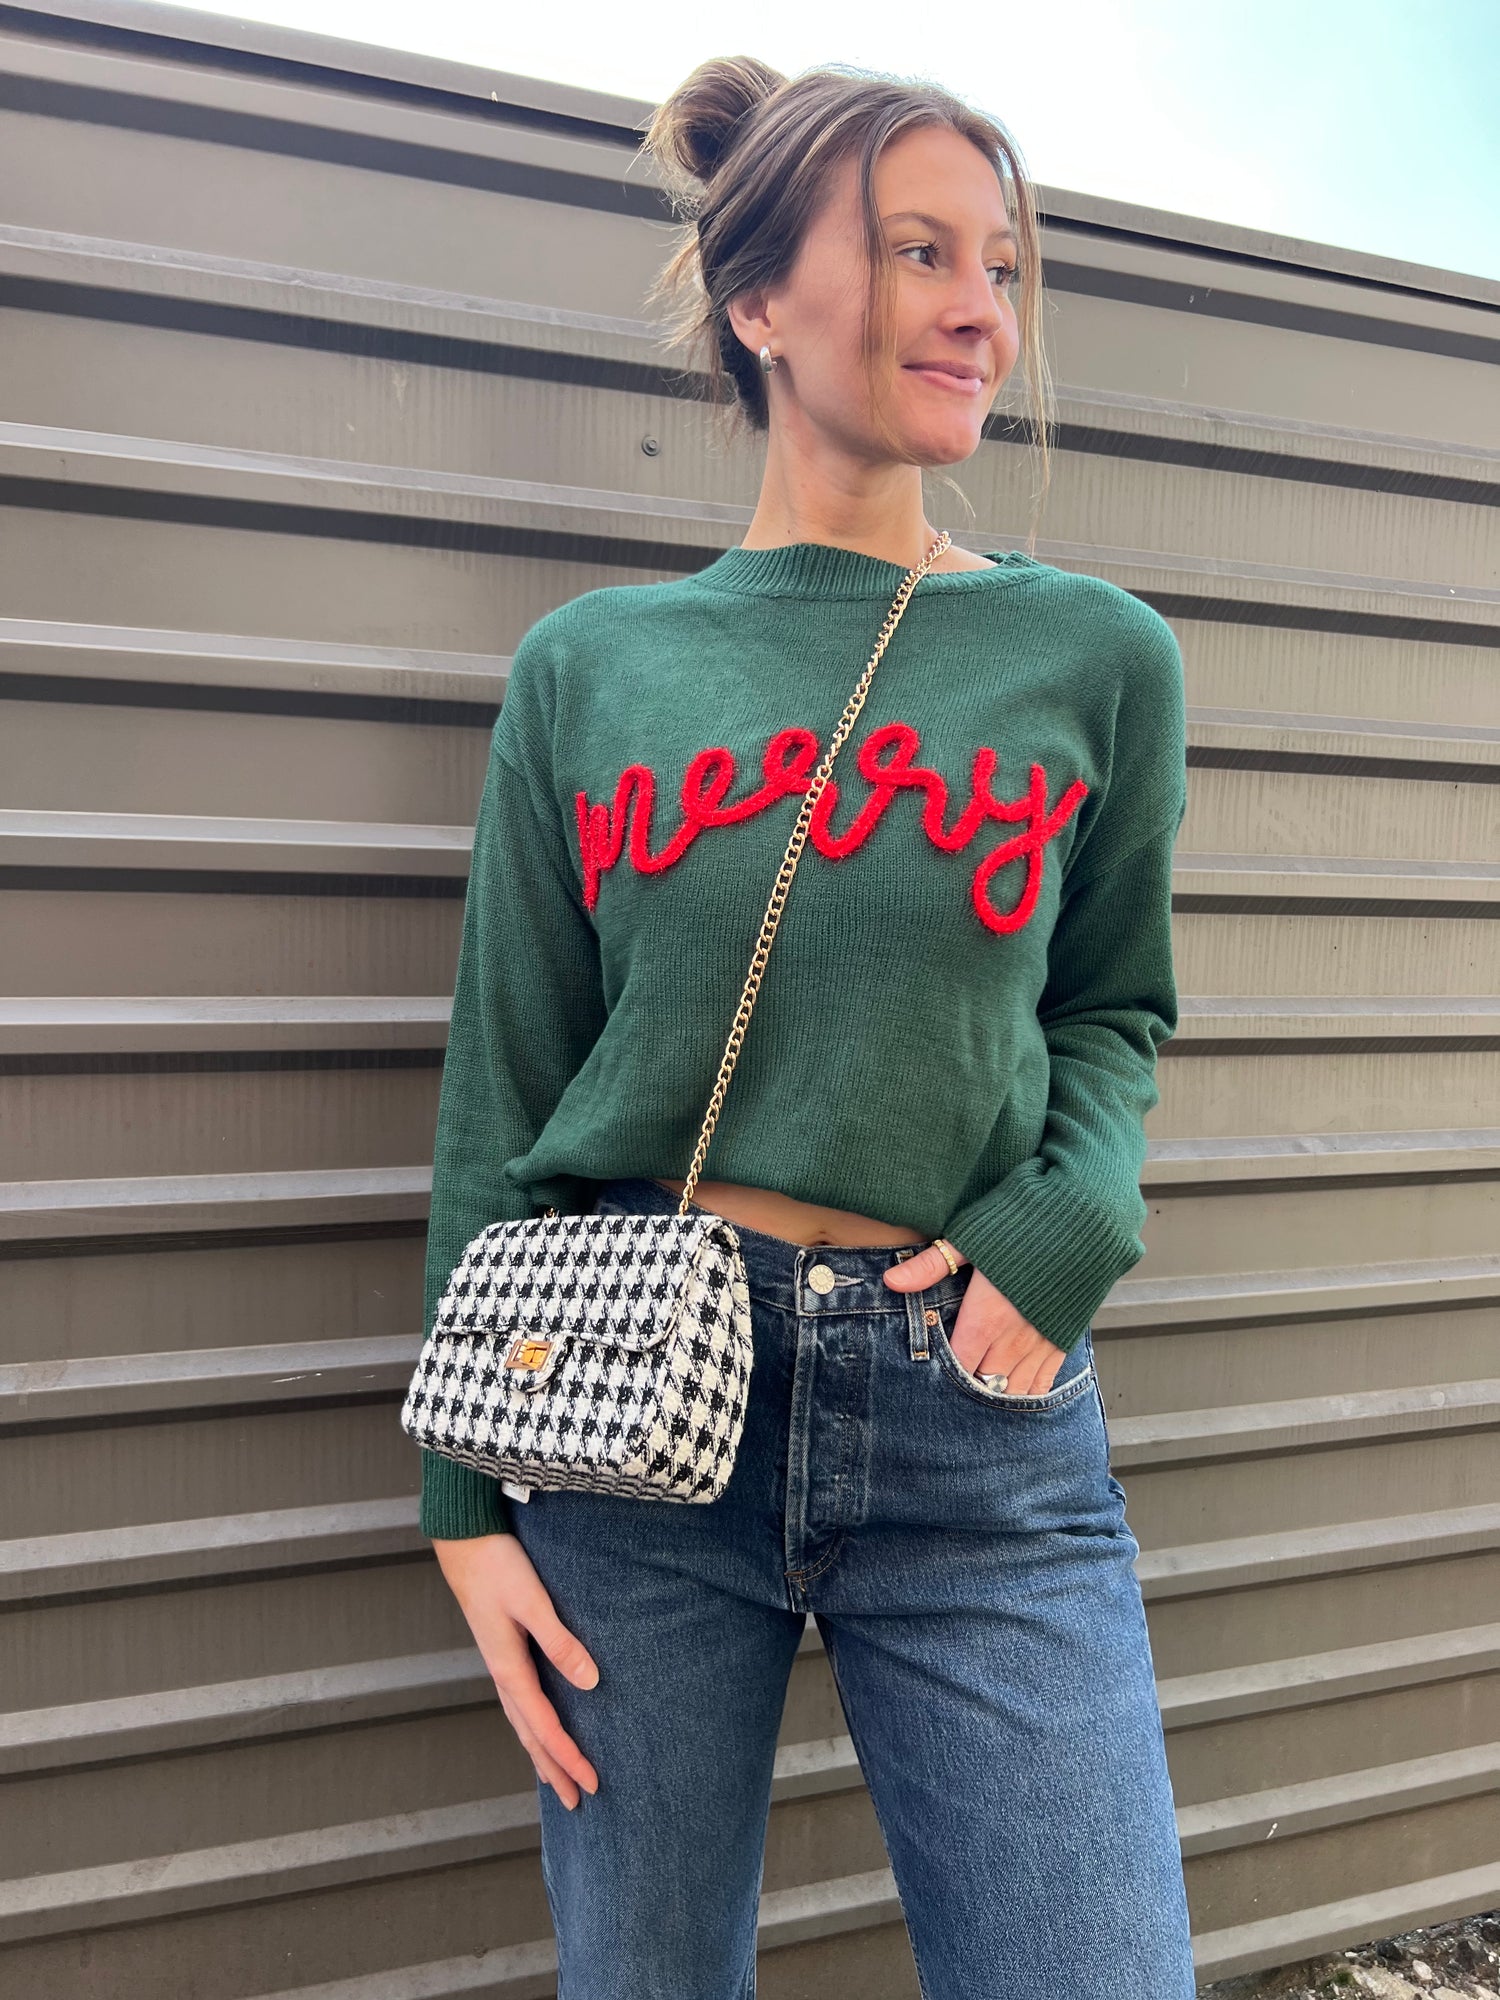 MERRY TINSEL SWEATER IN GREEN - THE HIP EAGLE BOUTIQUE